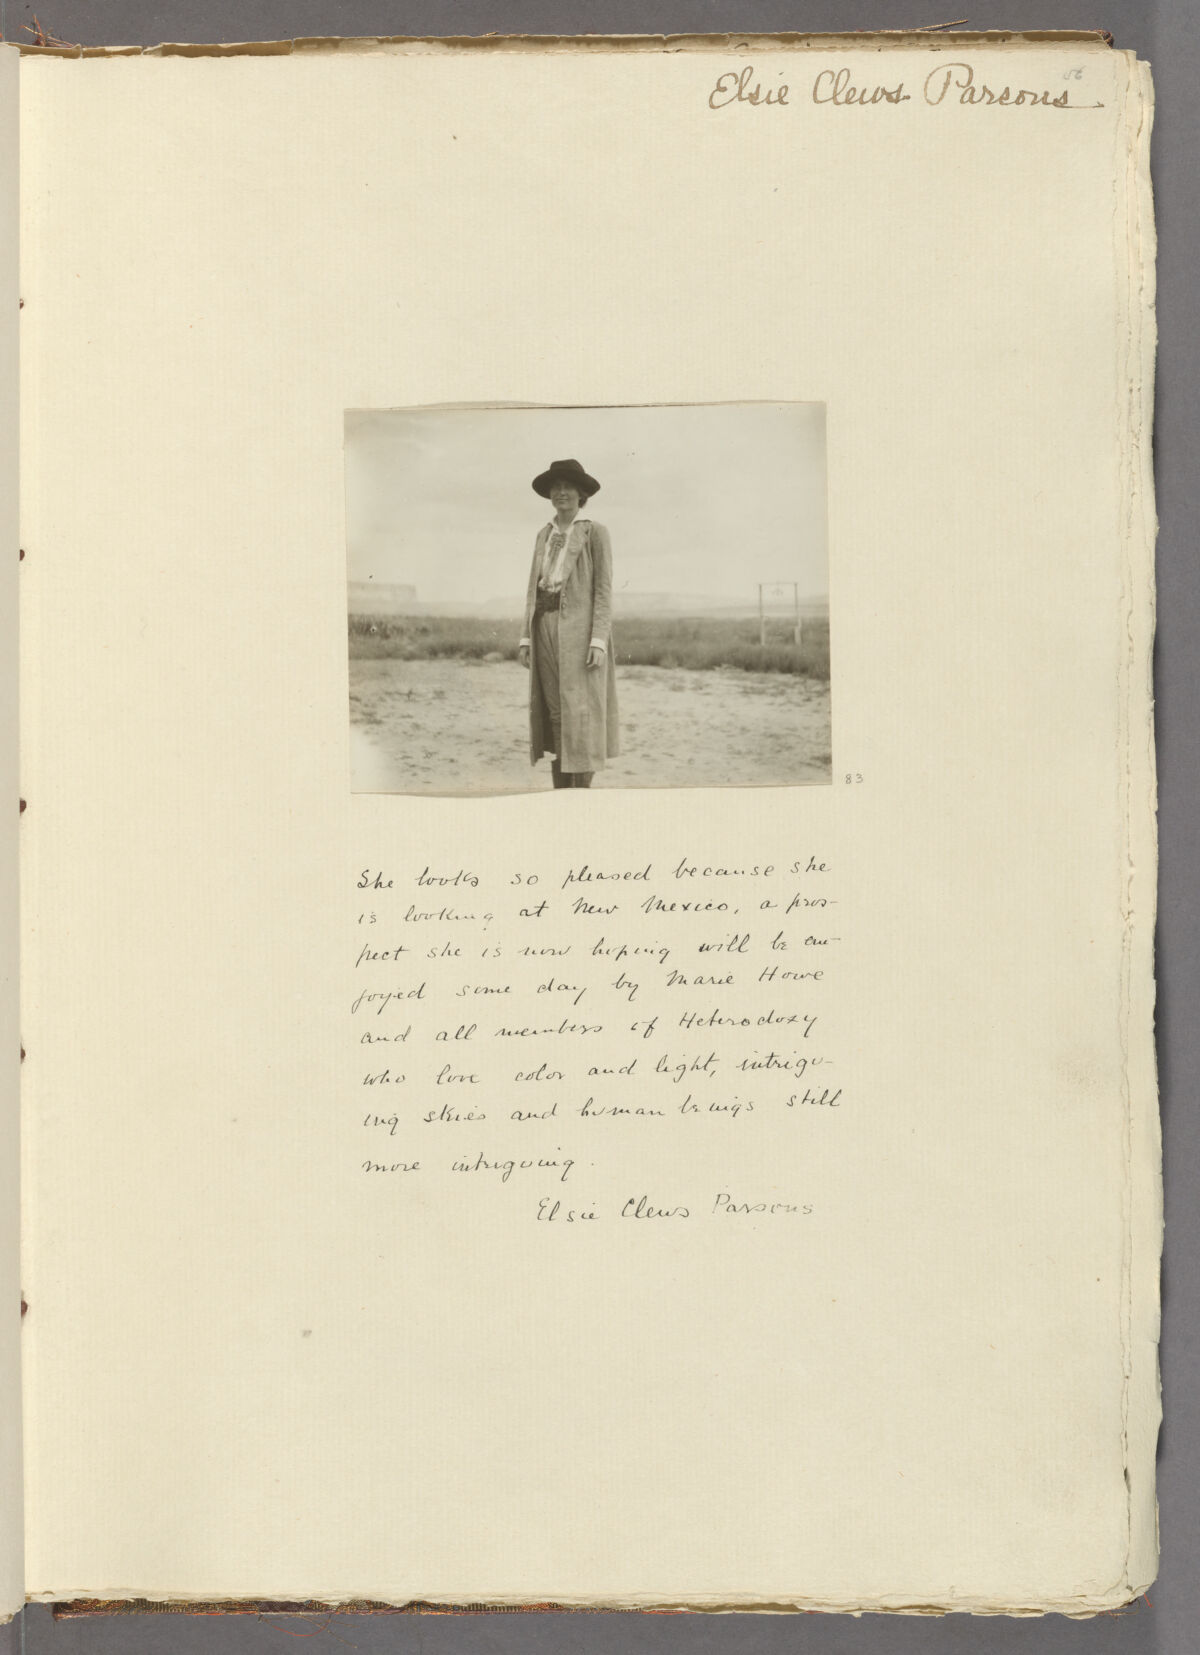 photo of Parsons standing amid sand in a scrapbook